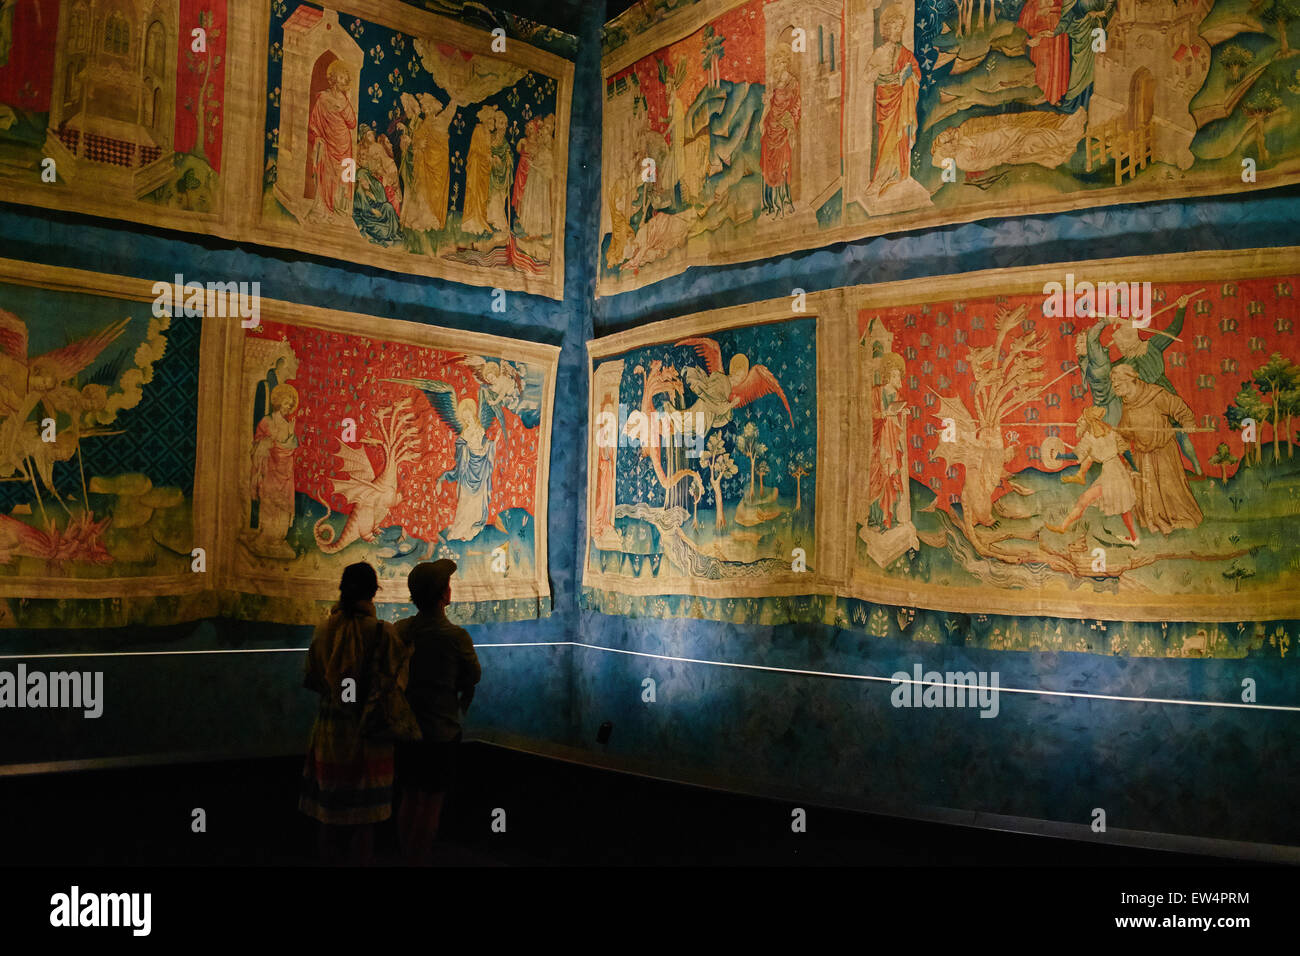 France, Maine-et-Loire, Angers, Apocalypse of Angers Tapestries on Display at Chateau d'Angers Stock Photo